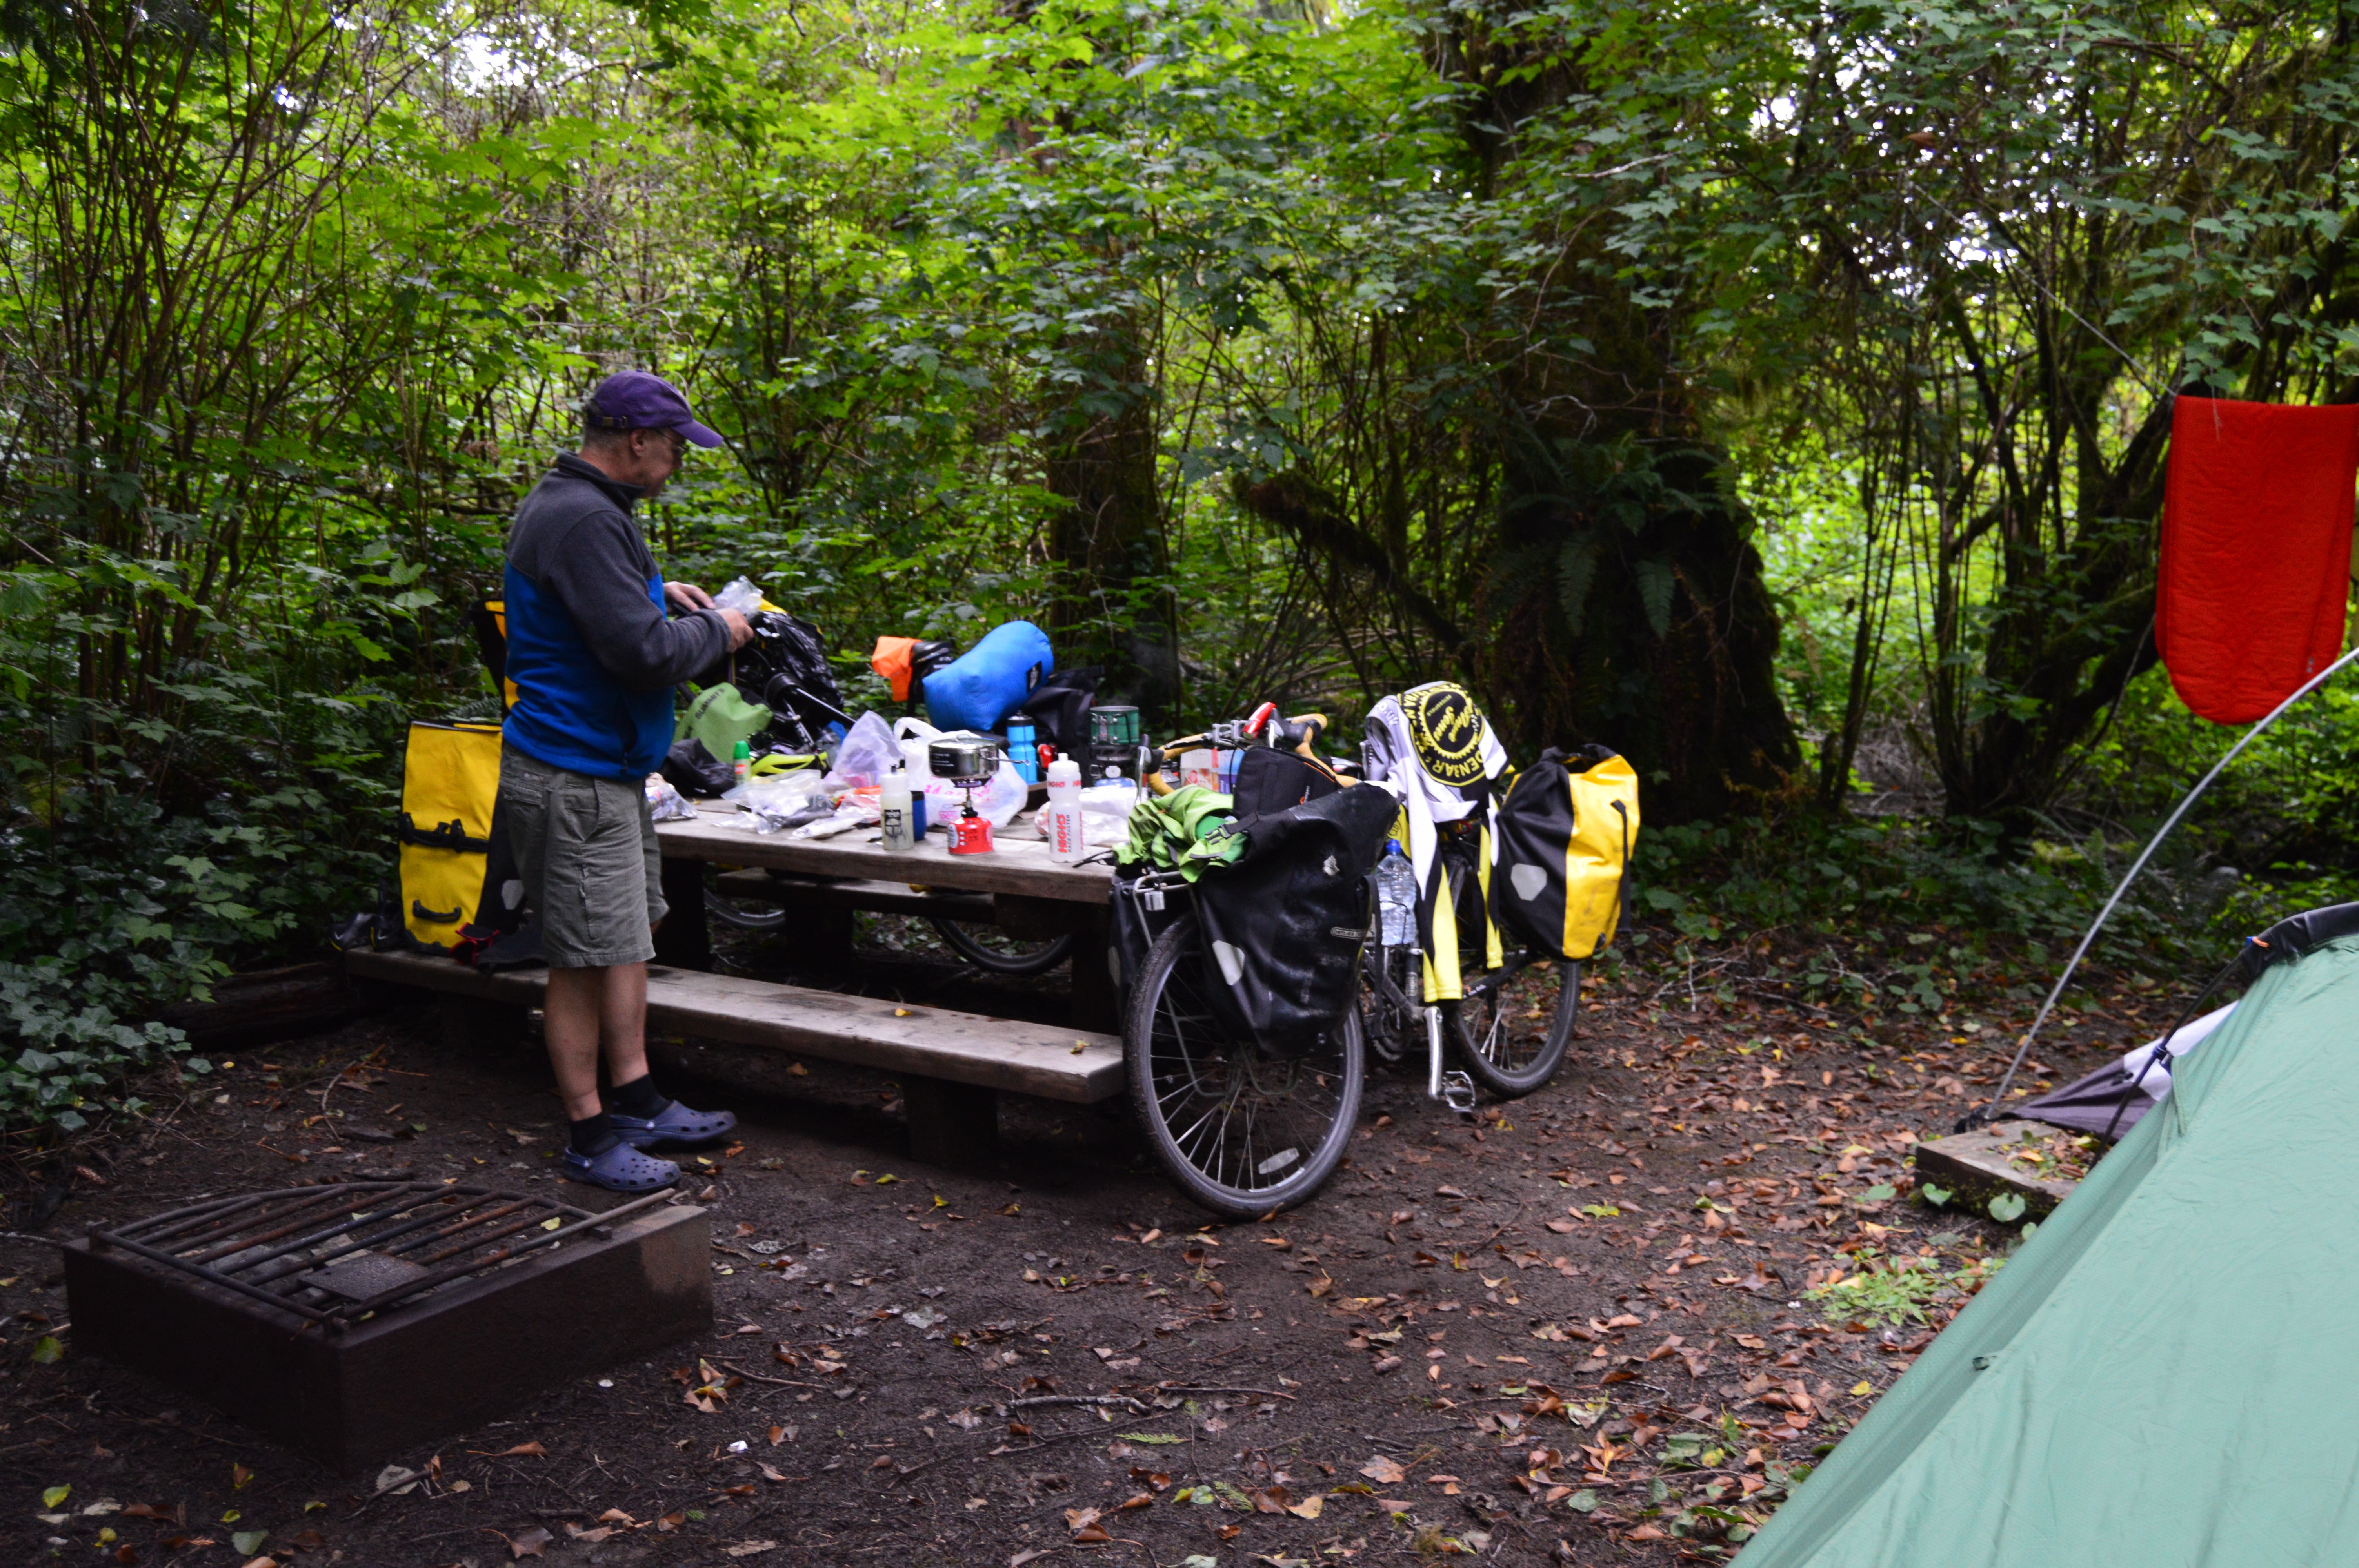 Decent sized campsite - enough room for 3 small tents plus our bikes